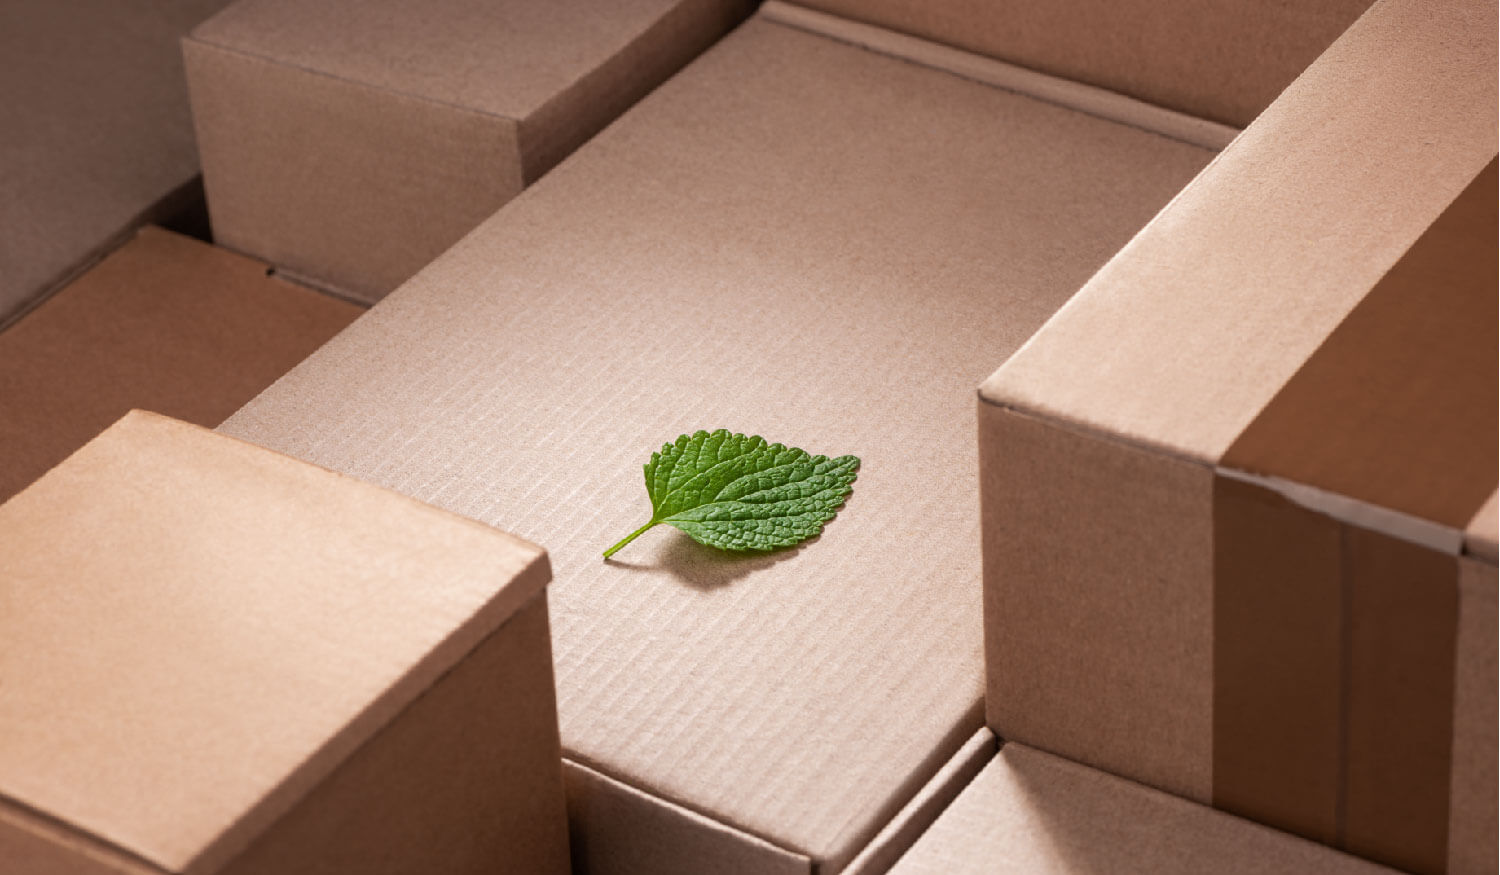 Why Should Shippers Care About Sustainability?